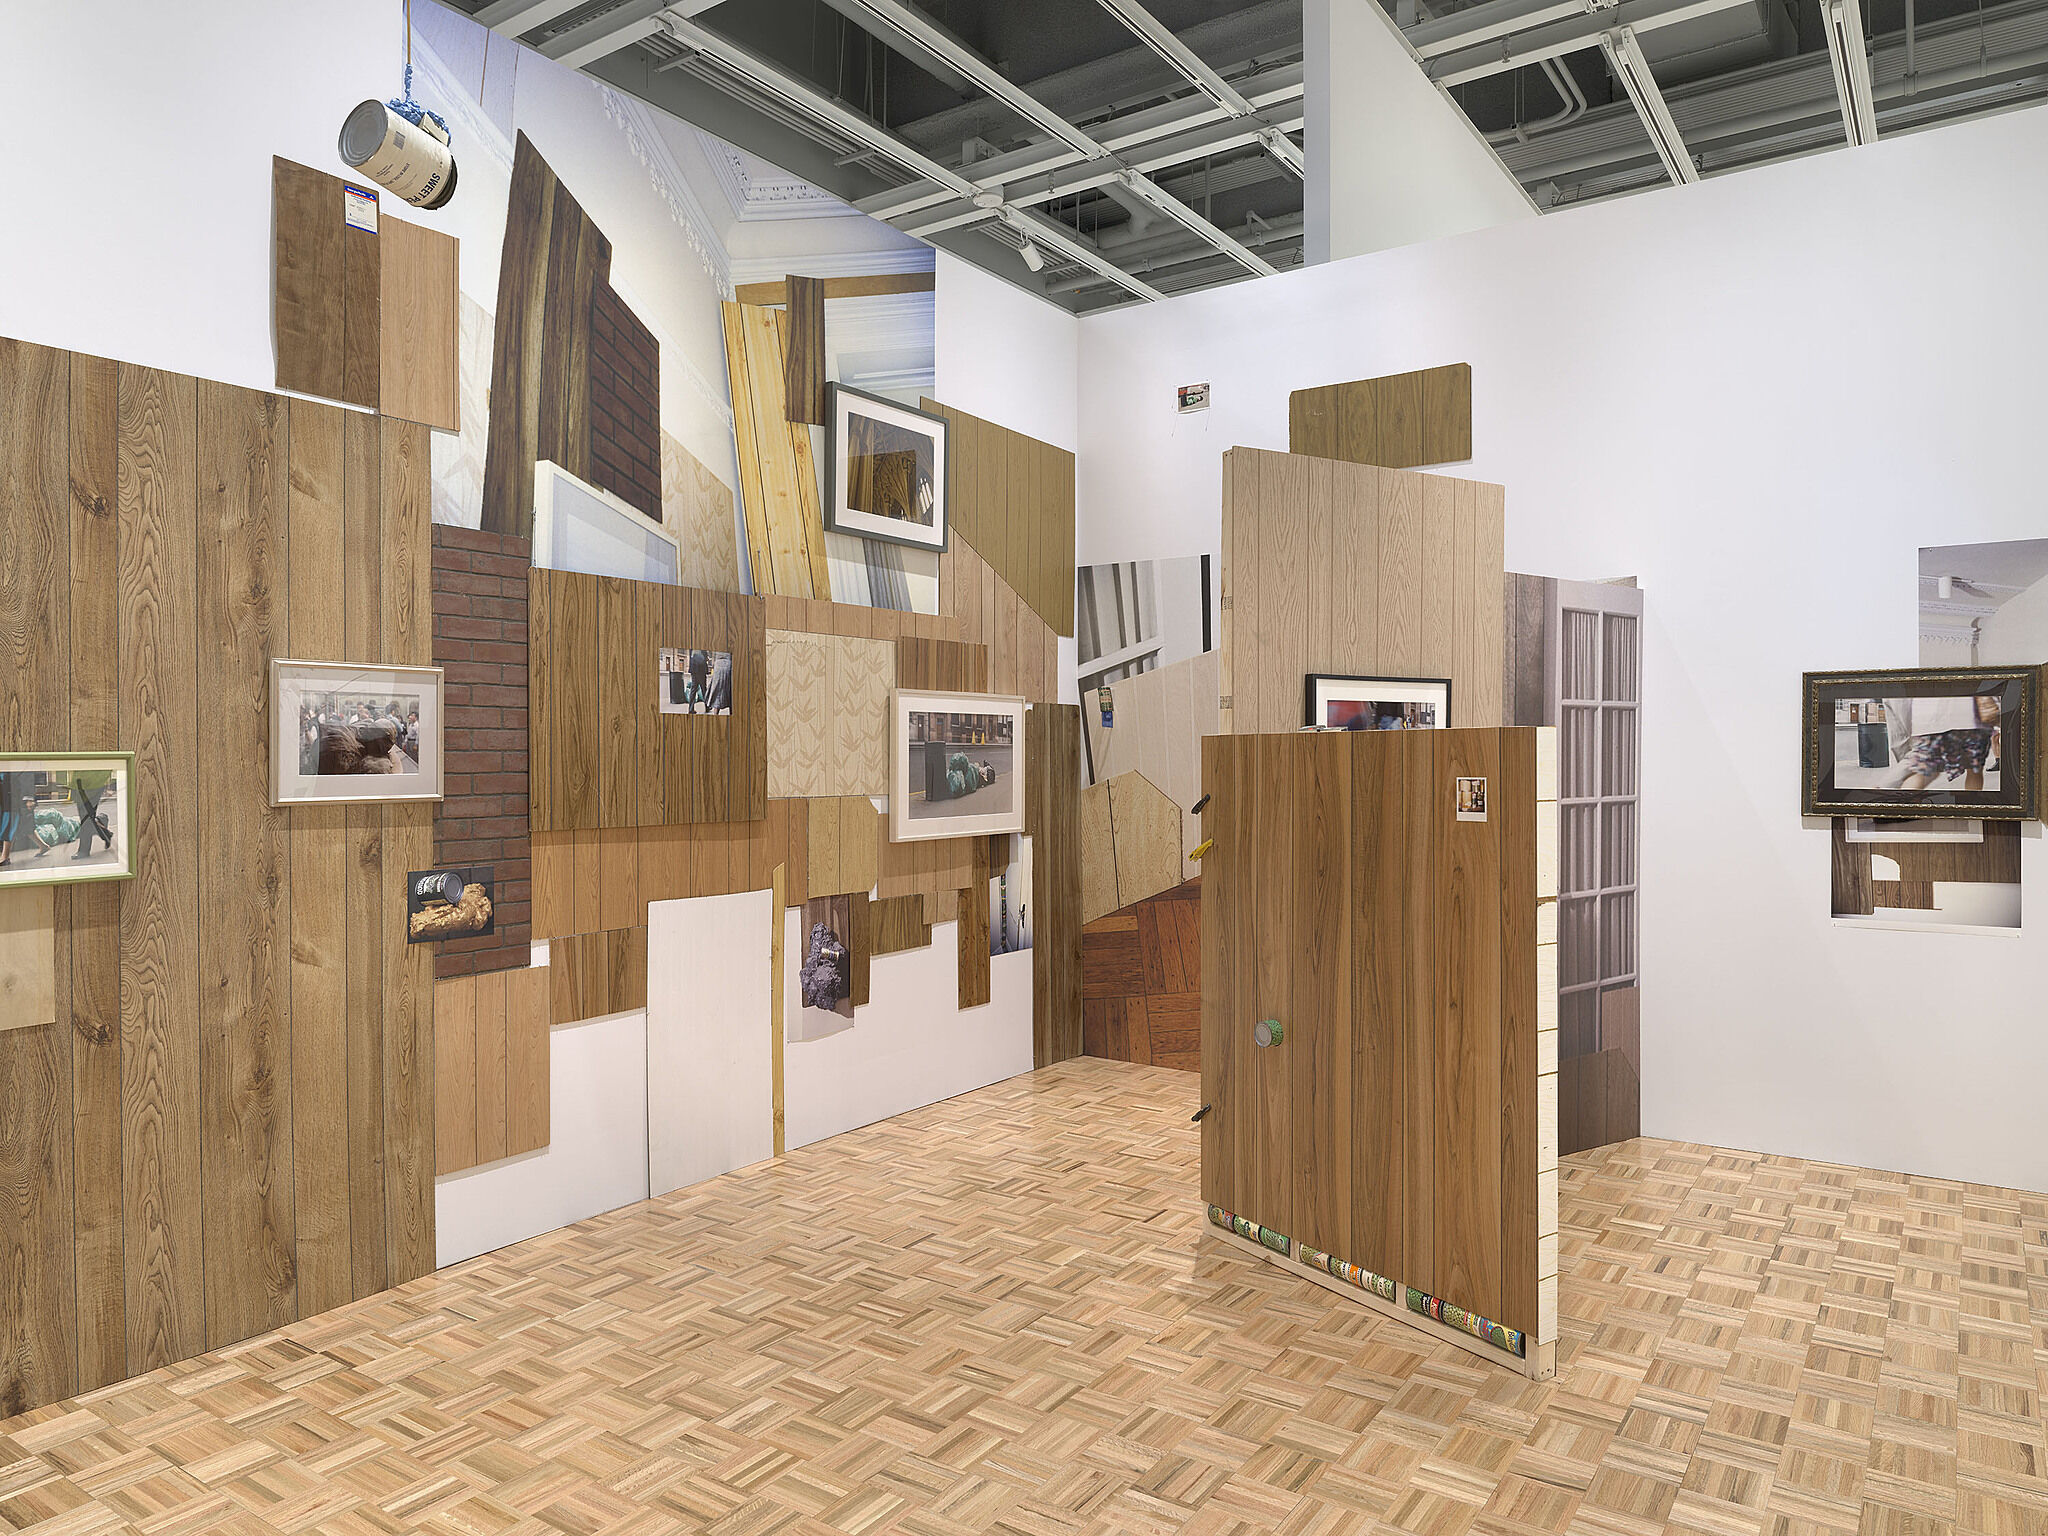 A gallery with fake wood walls, large photographs, and cans of peas.